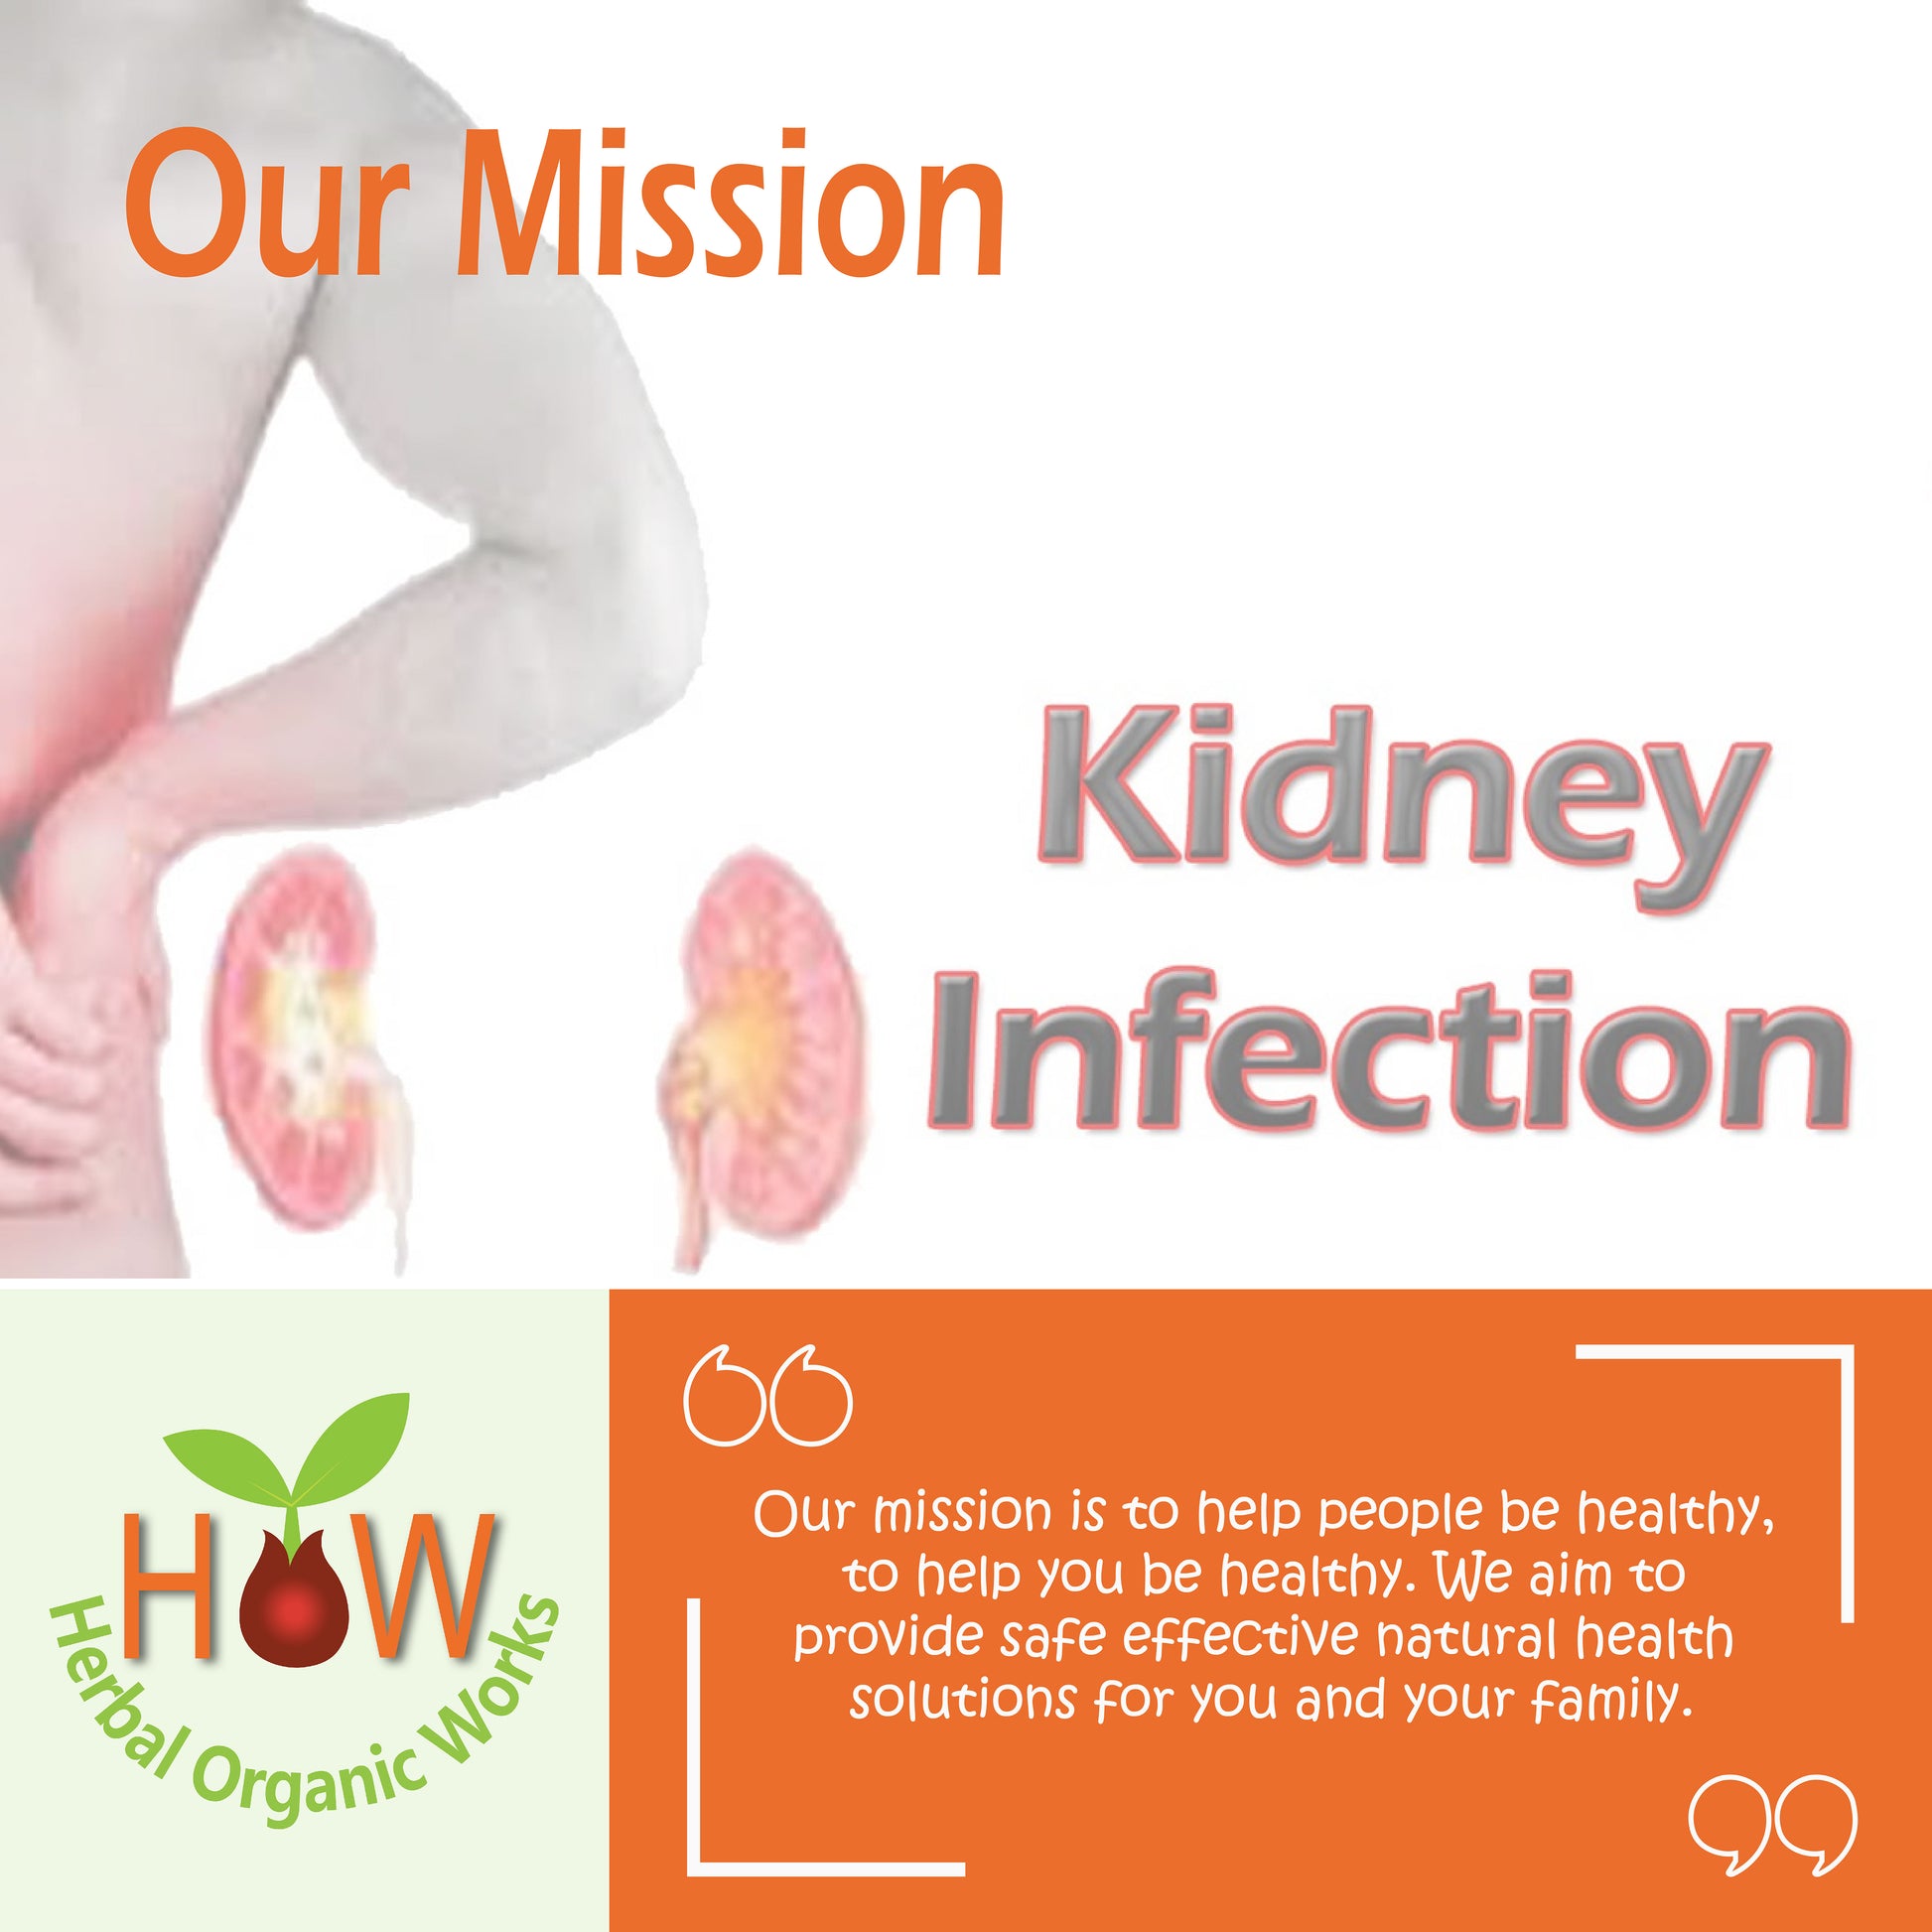 KIDNEY INFLAMMATION REMEDY (HOW193)